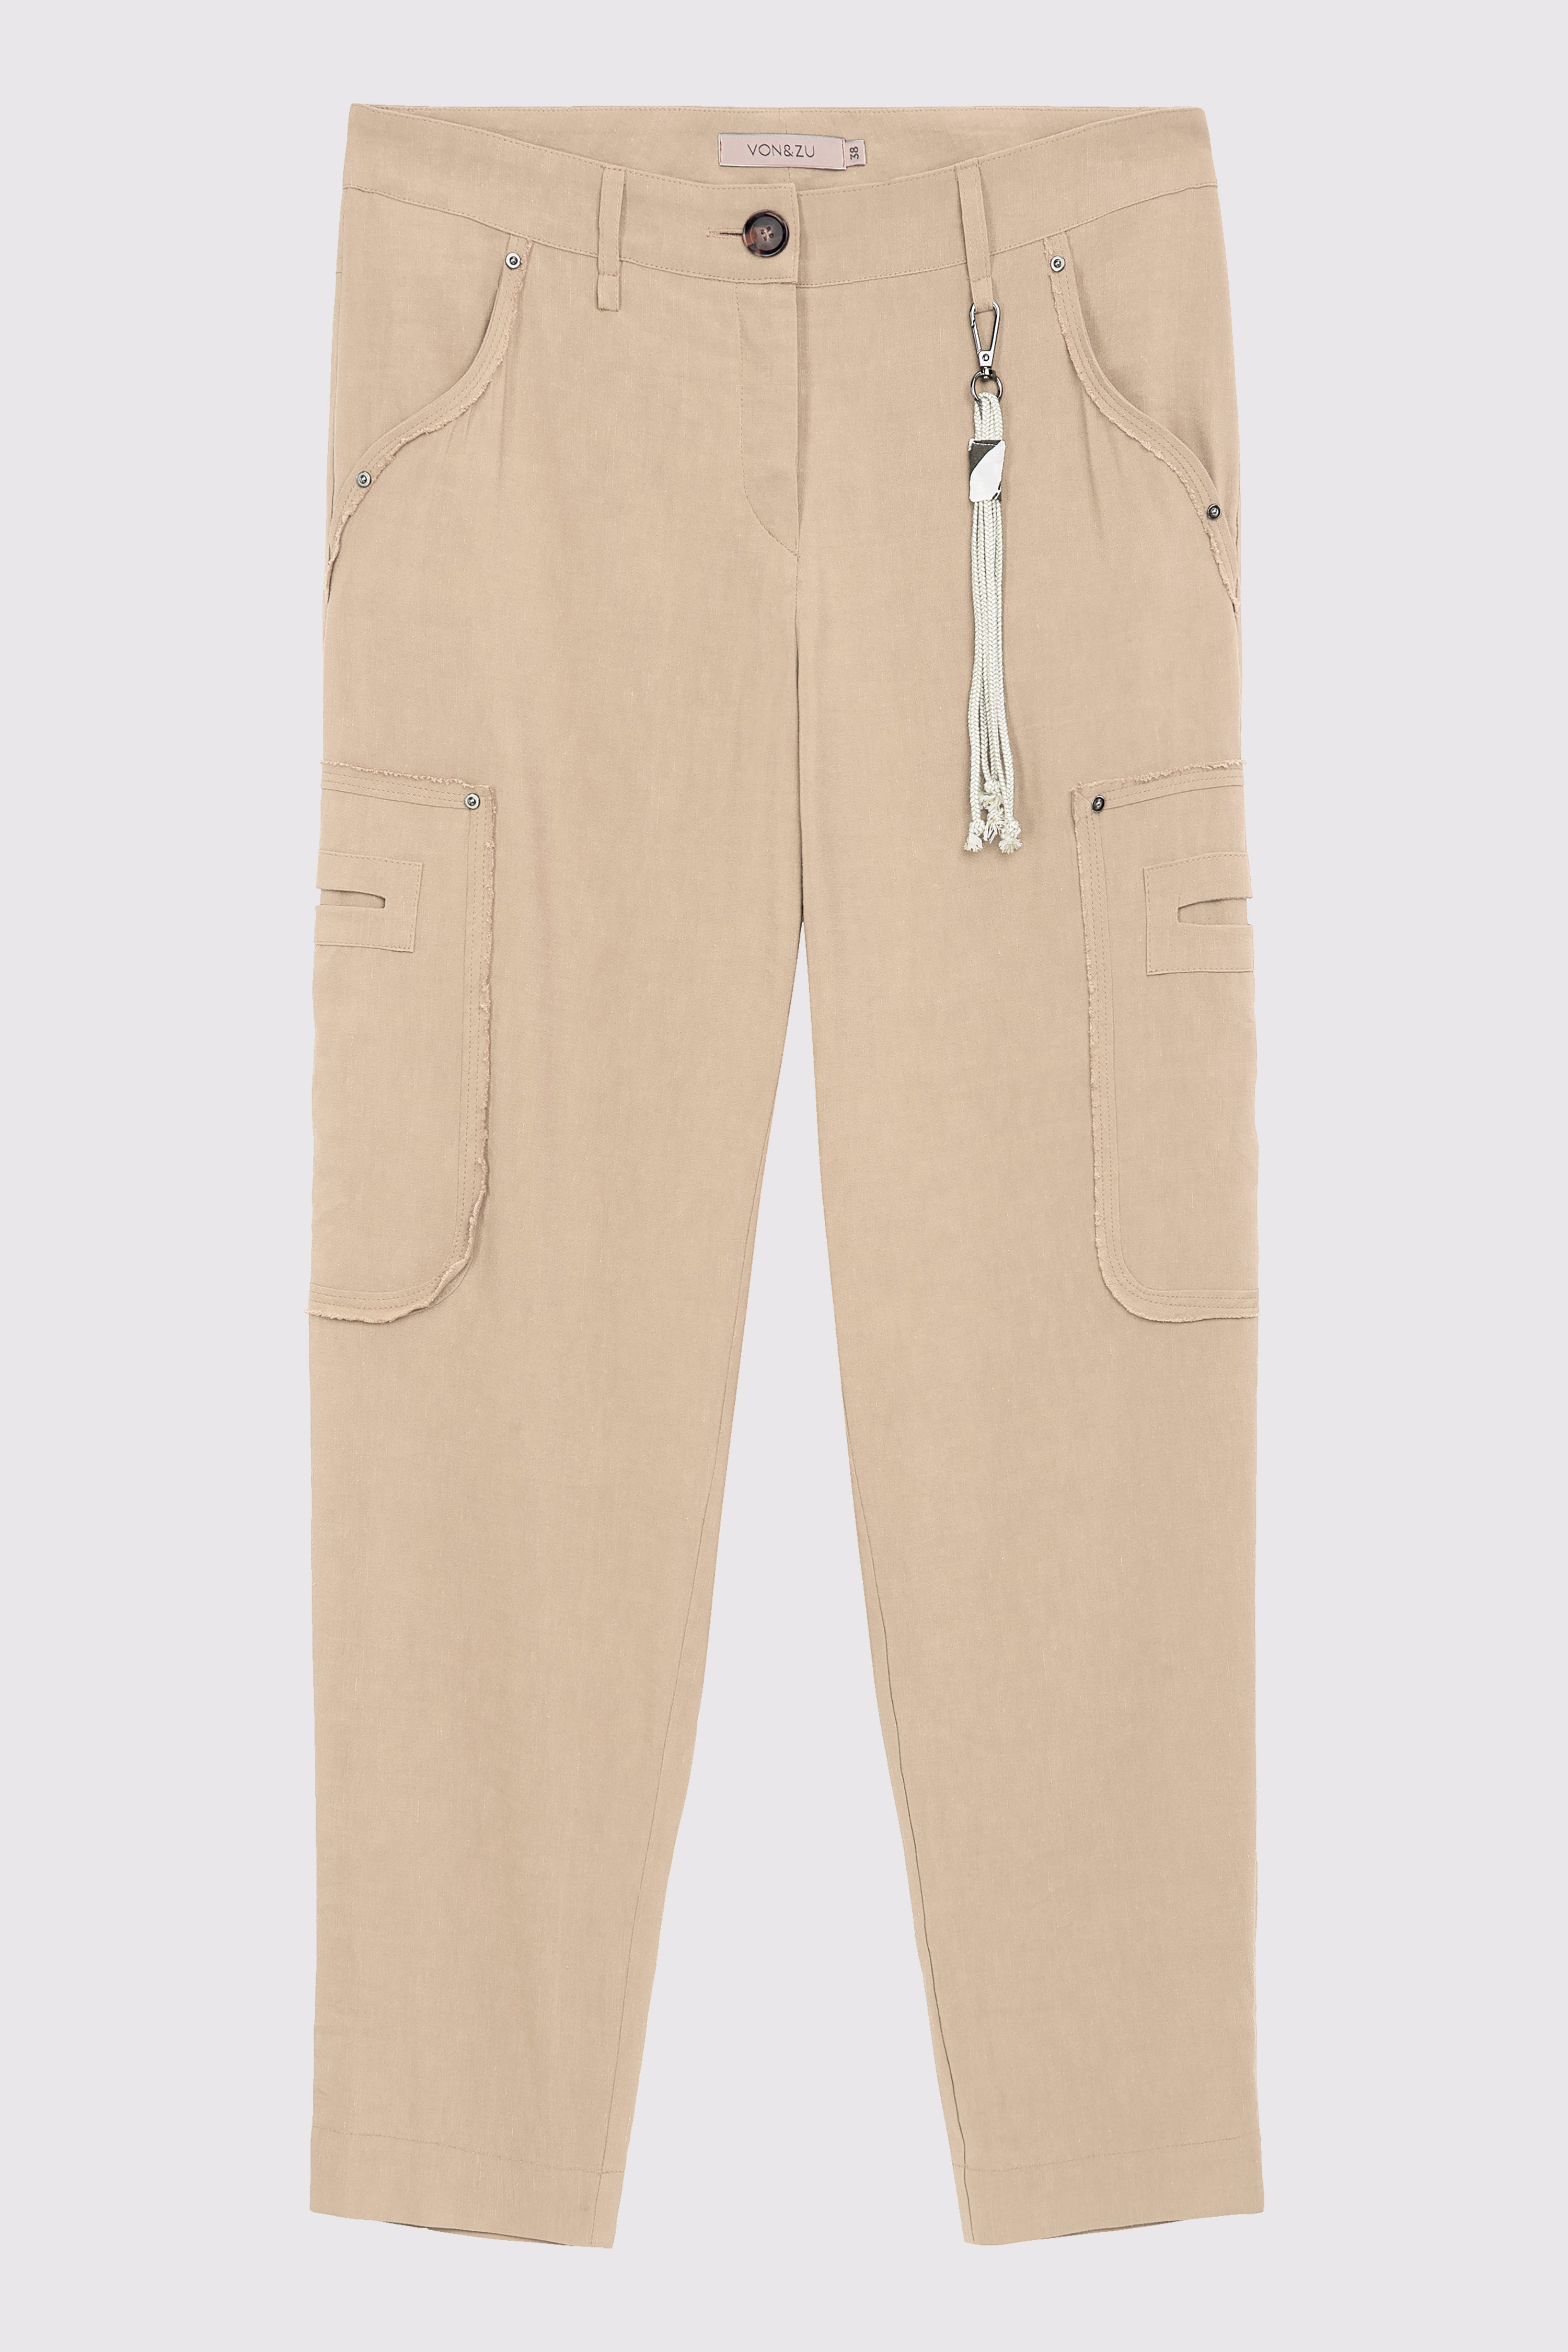 worker pant